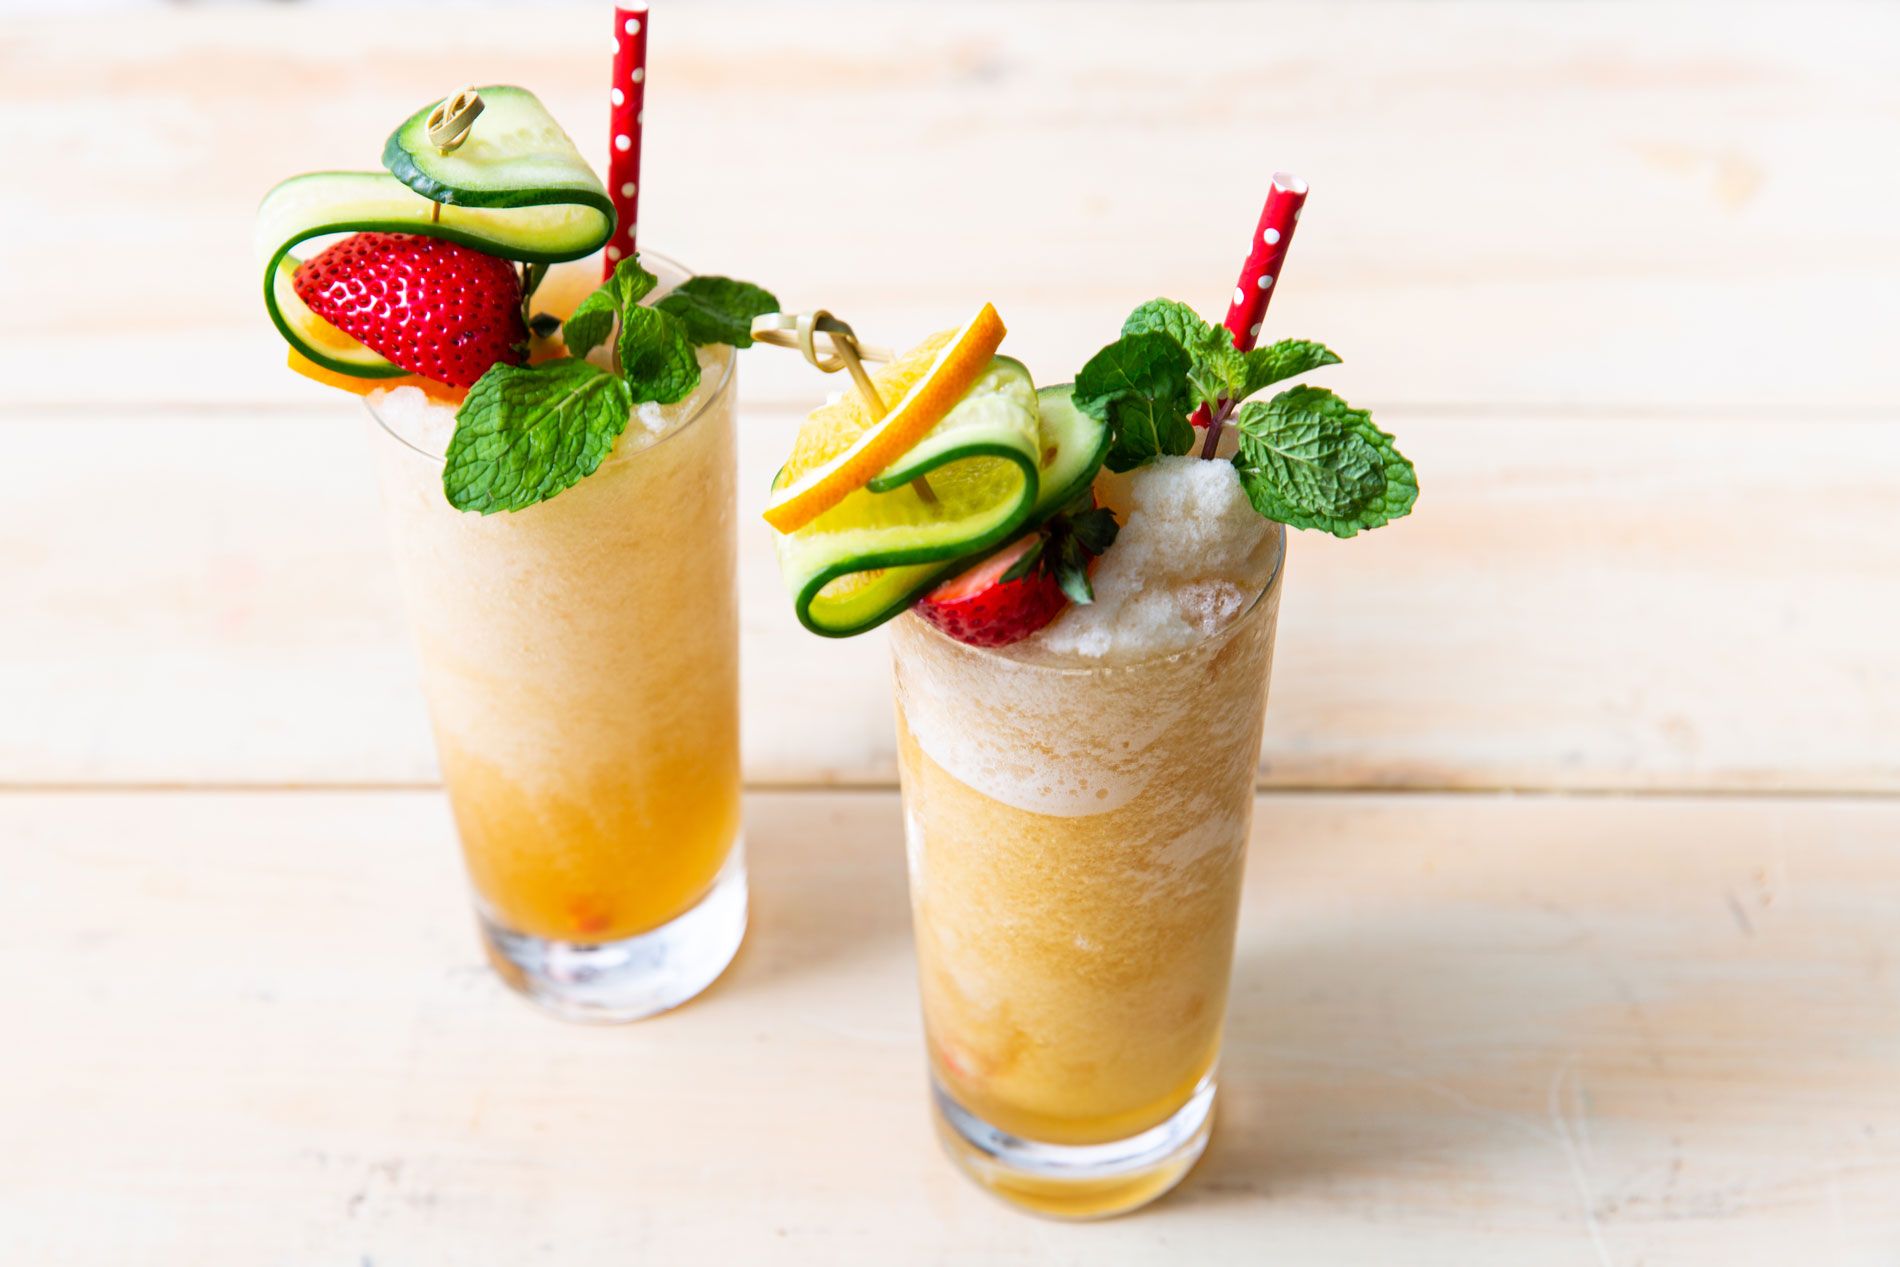 Pimm's Cup Recipe - Art of Drink